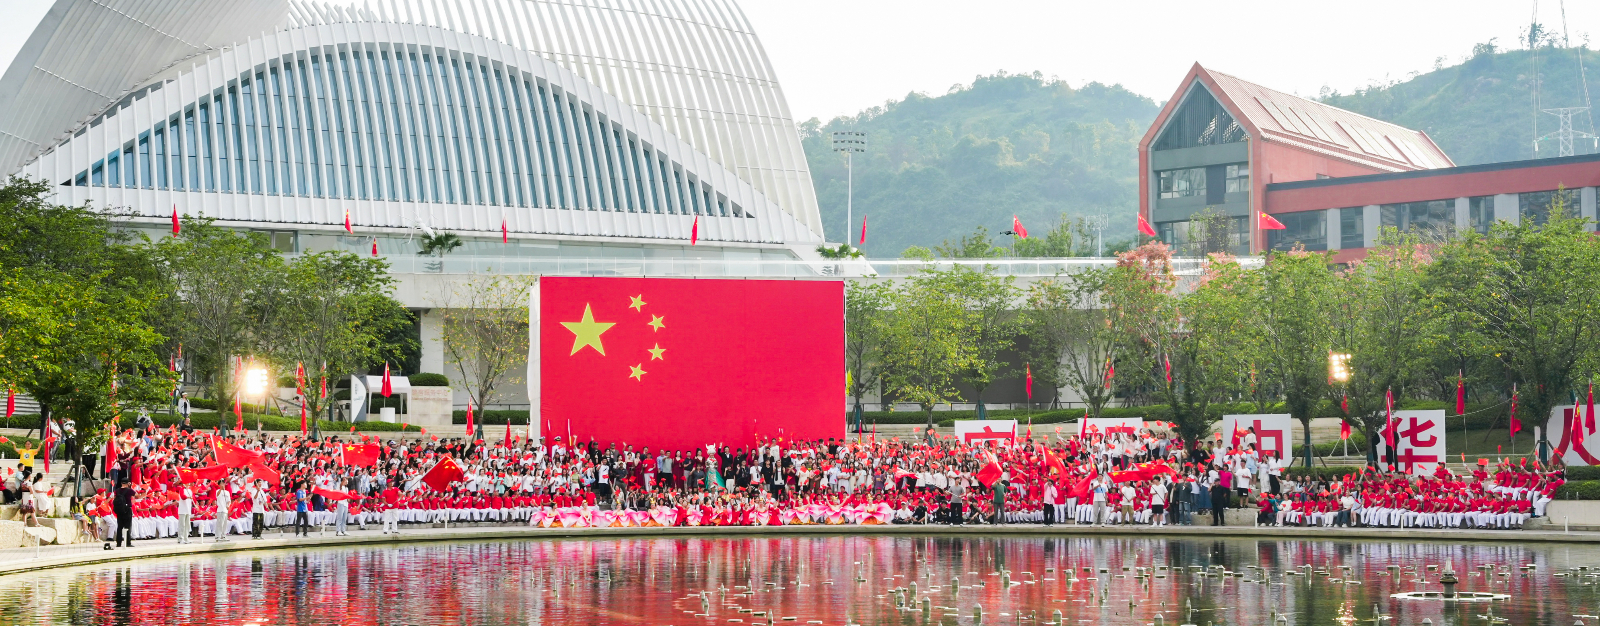 Thousands sing in unison to fete National Day in Guiyang